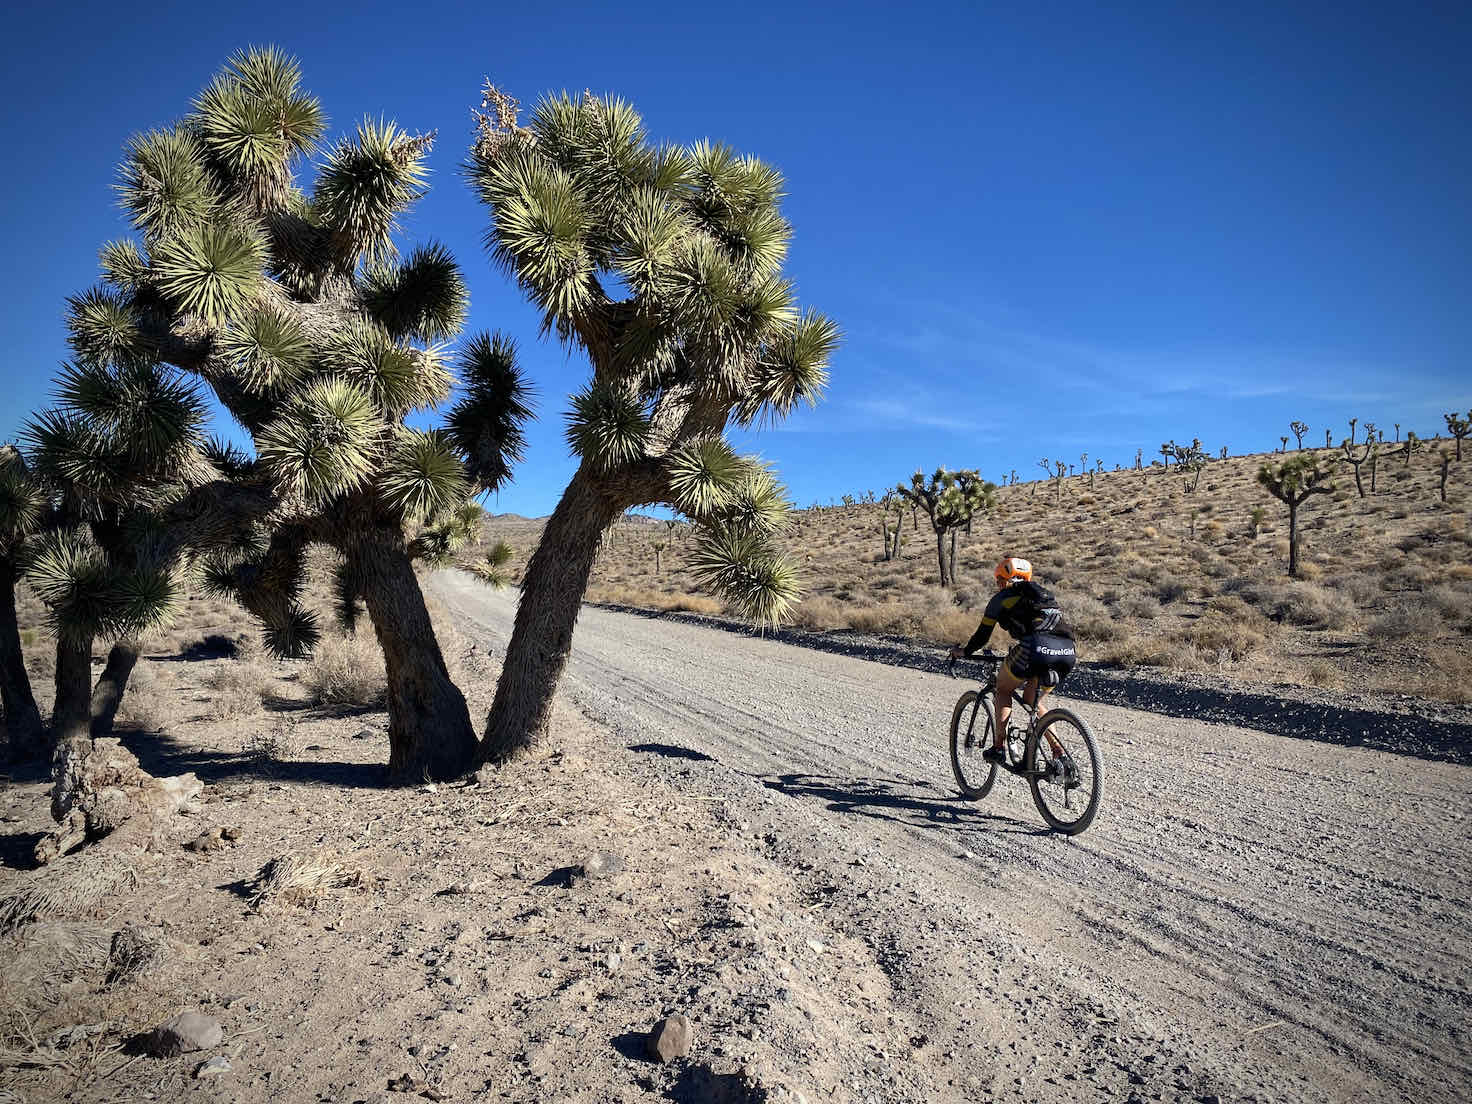 Gravel cyclist with Joshua Tree in foreground.